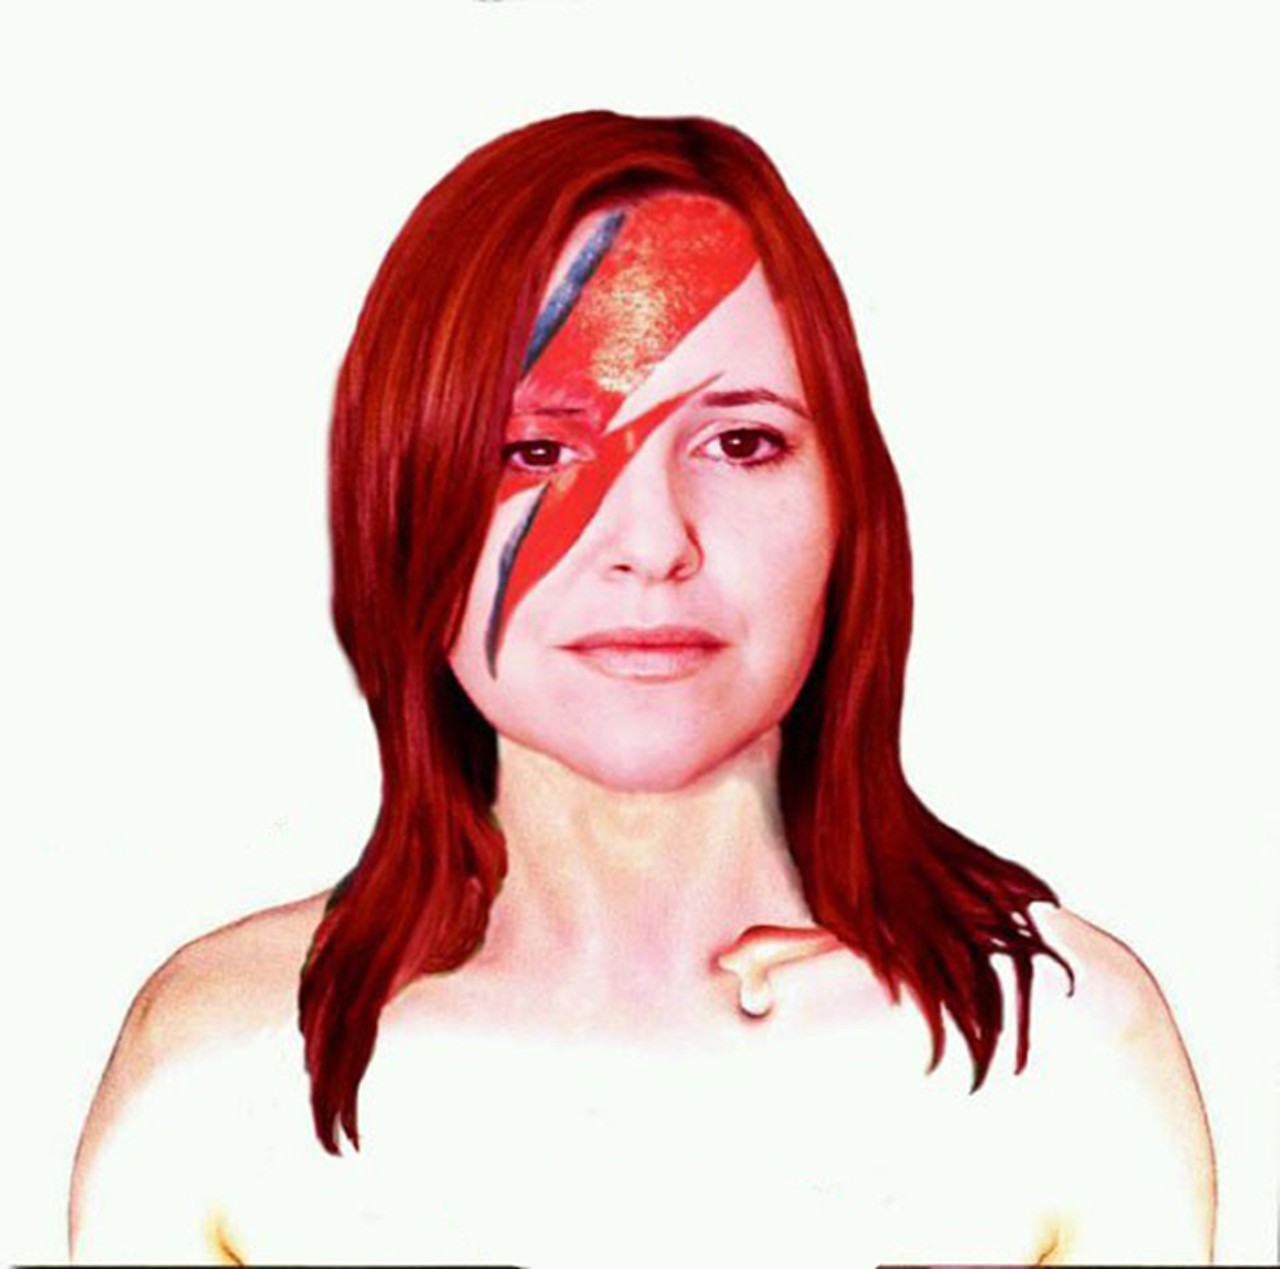 Thursday, May 25A Very Bowie Party & Fundraiser for Katie Ball at Will's PubPhoto by Miriam Esther, Composite by Brett J. Barr